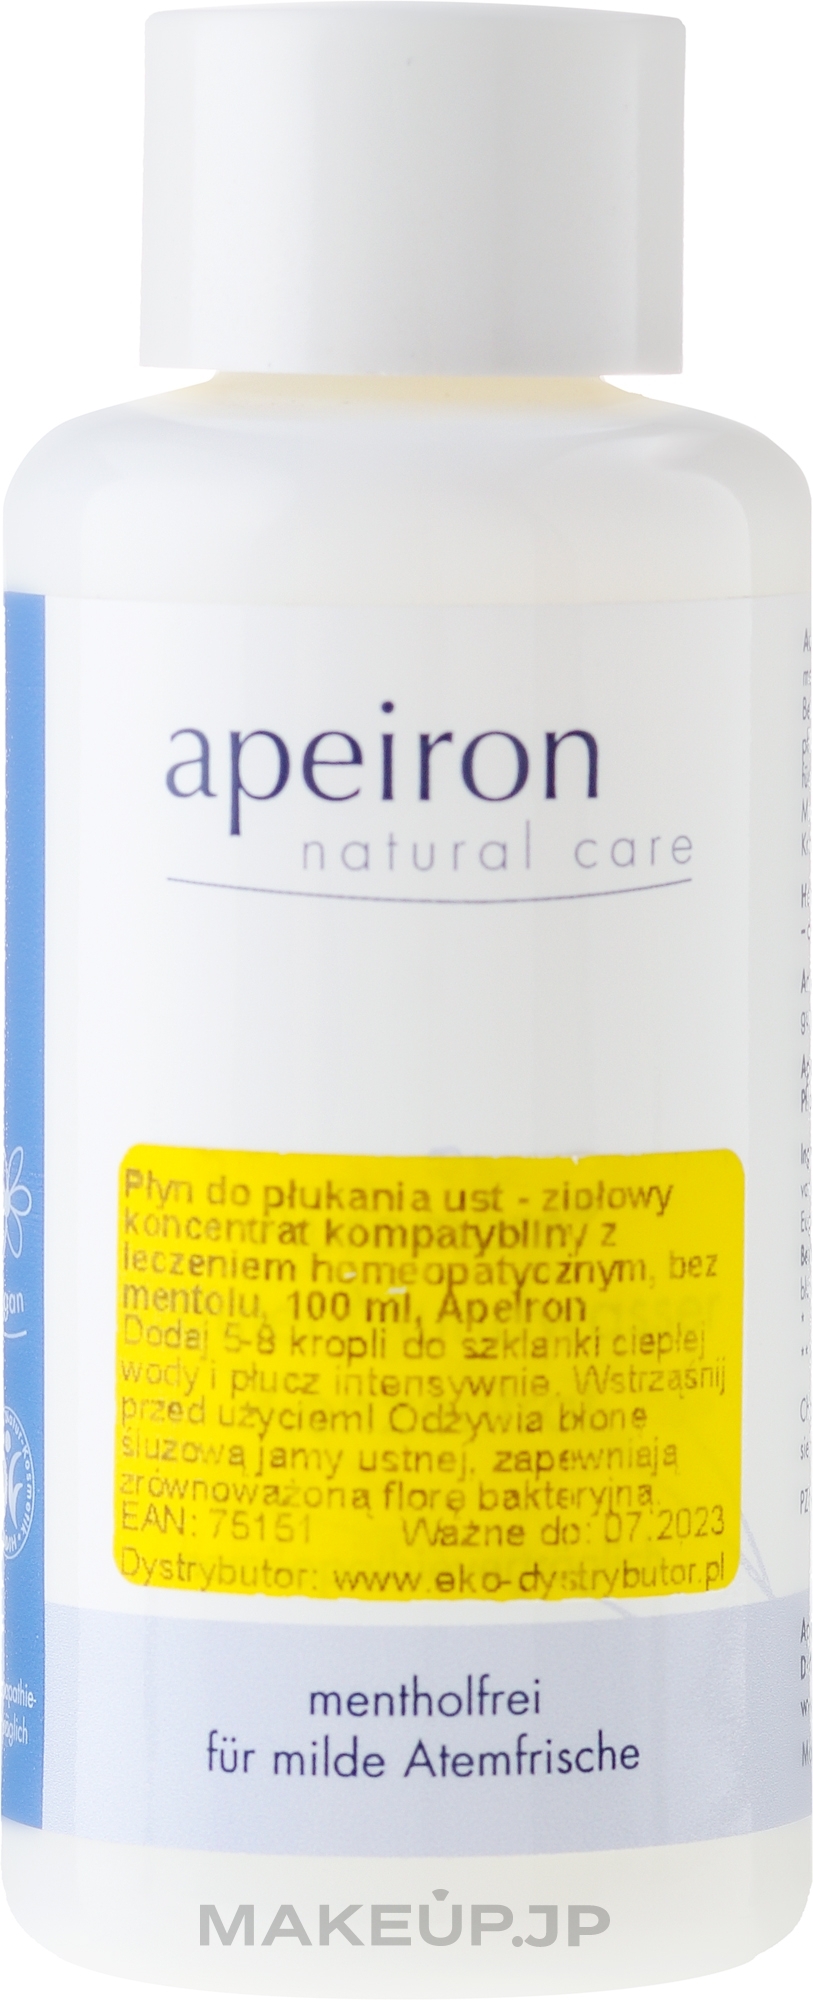 Homeopathic Mouthwash Concentrate - Apeiron Auromere Herbal Concentrated Mouthwash Homeopathic  — photo 100 ml